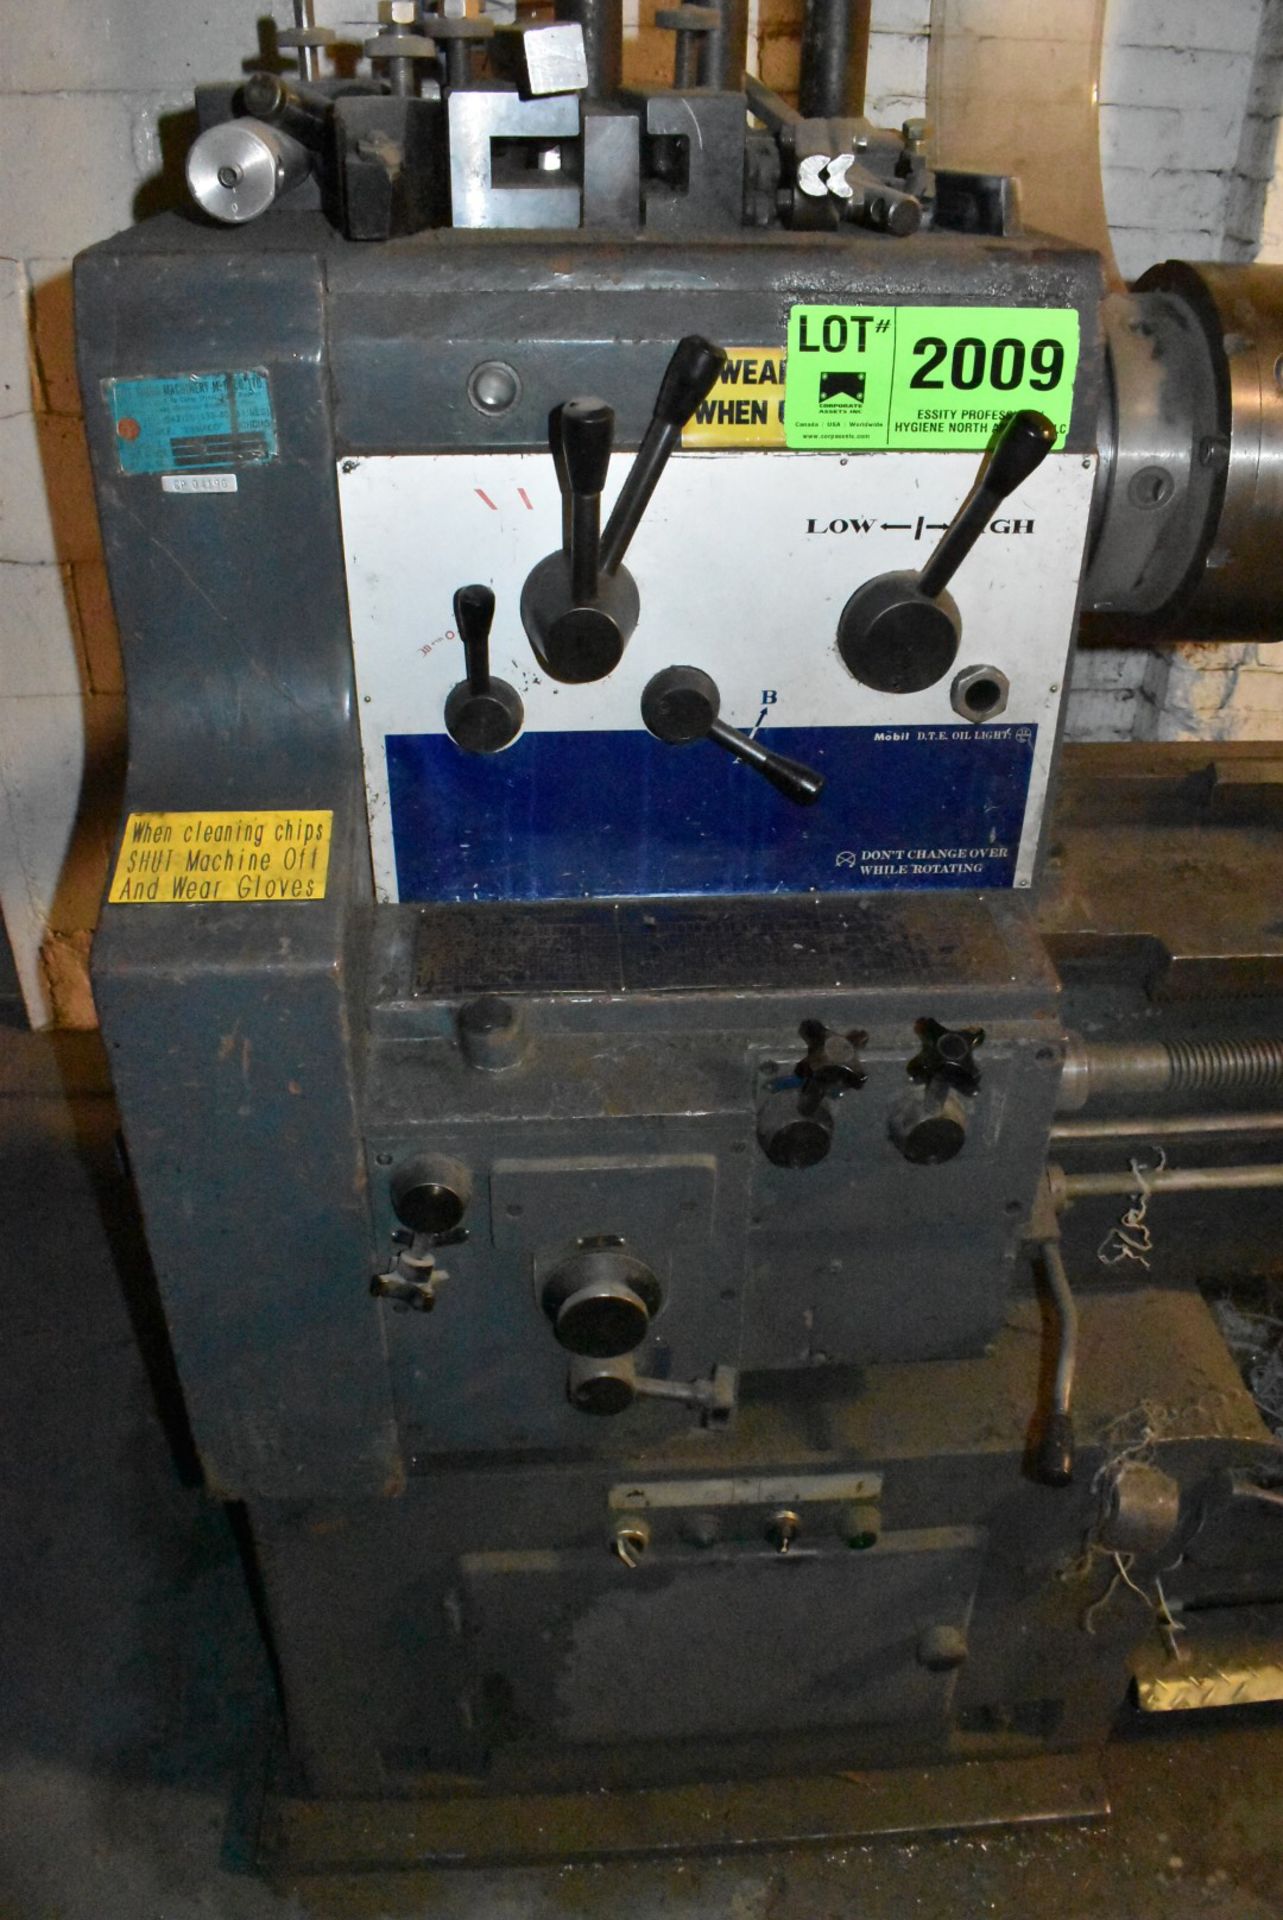 JET JE24X100 GAP BED ENGINE LATHE WITH 24" SWING OVER BED, 33" SWING IN THE GAP, 100" BETWEEN - Image 6 of 12